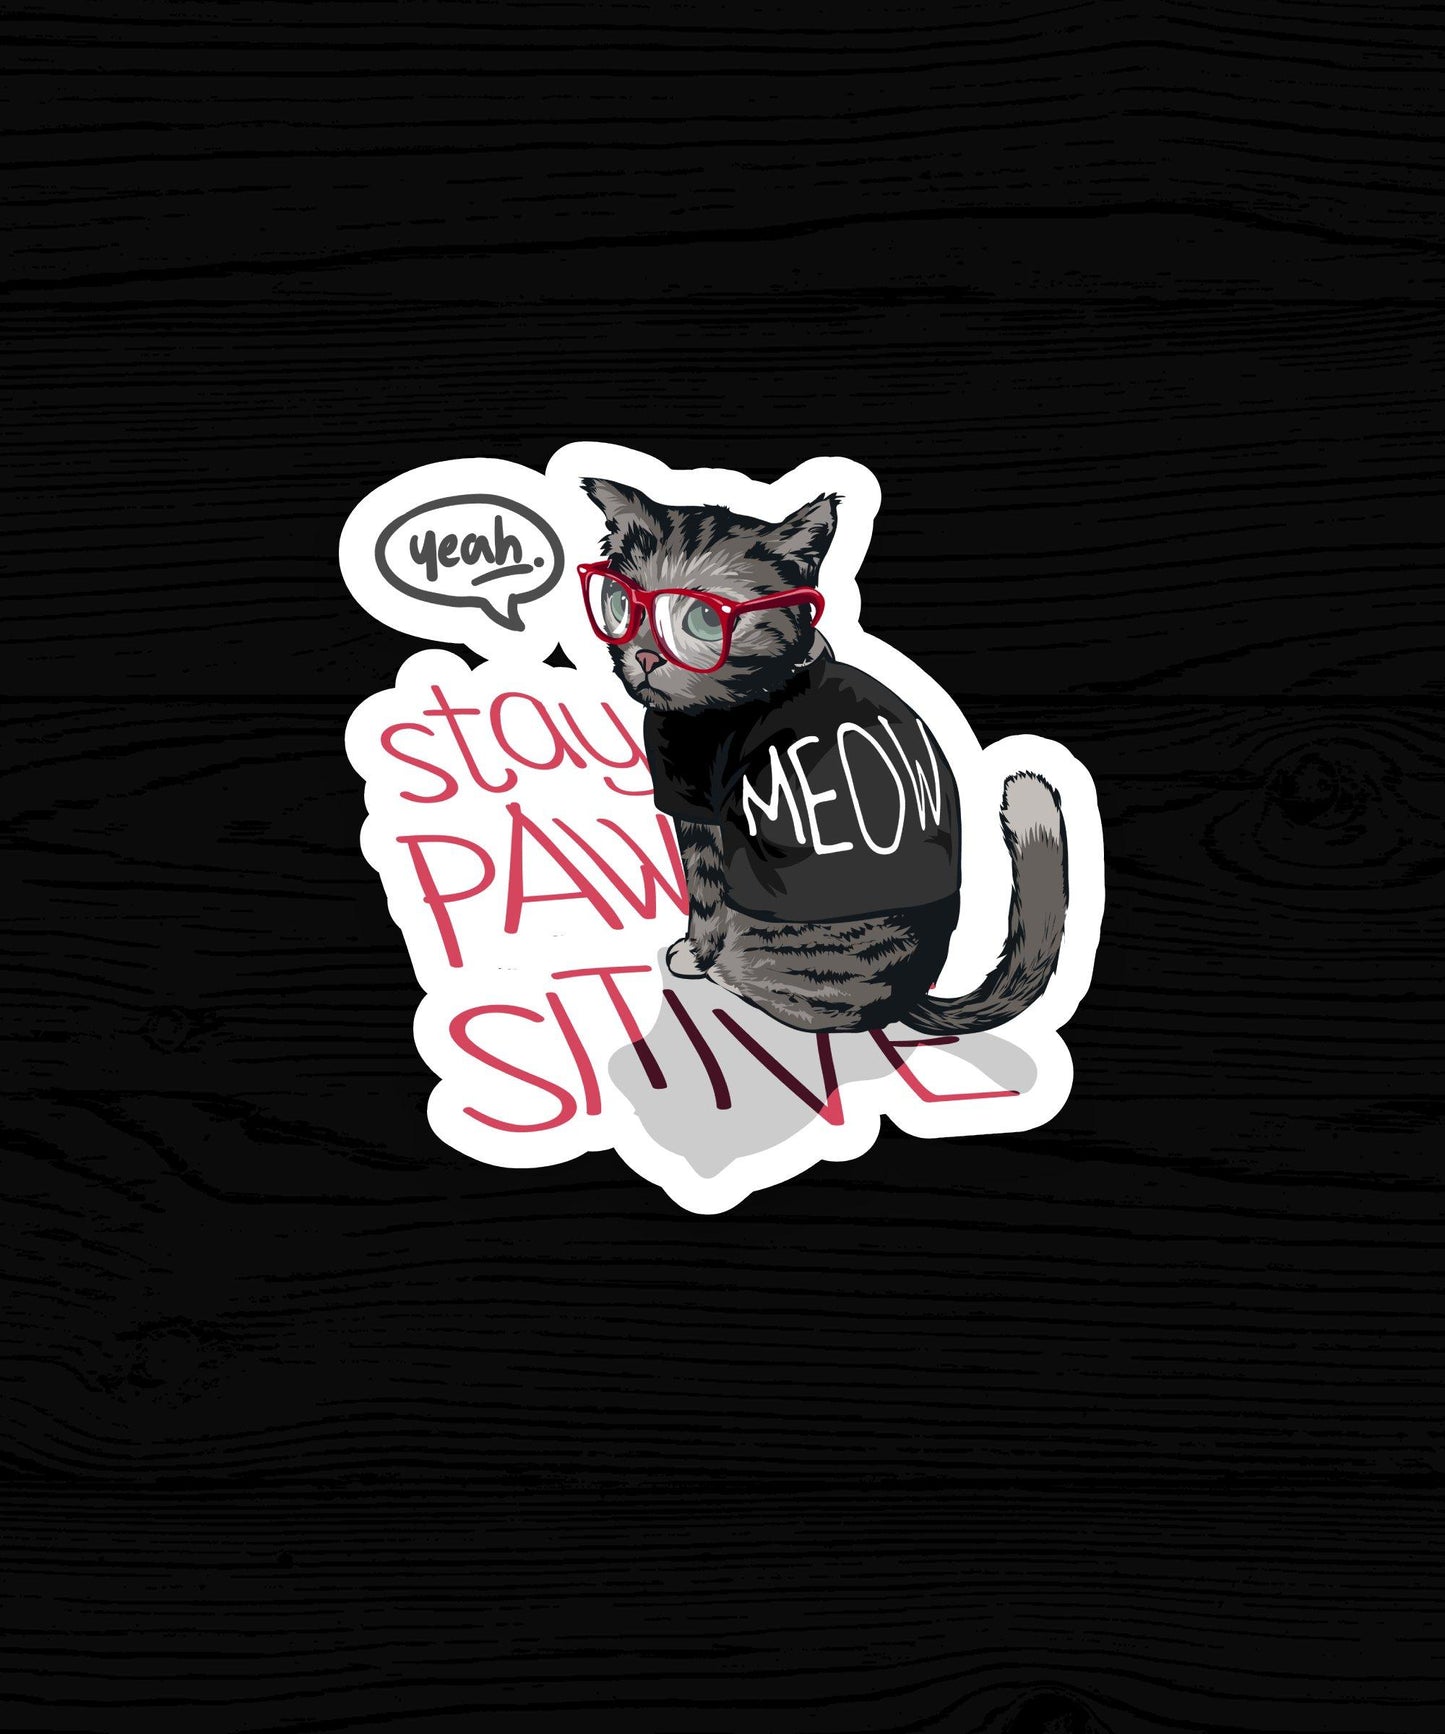 Stay PAWsitive Sticker